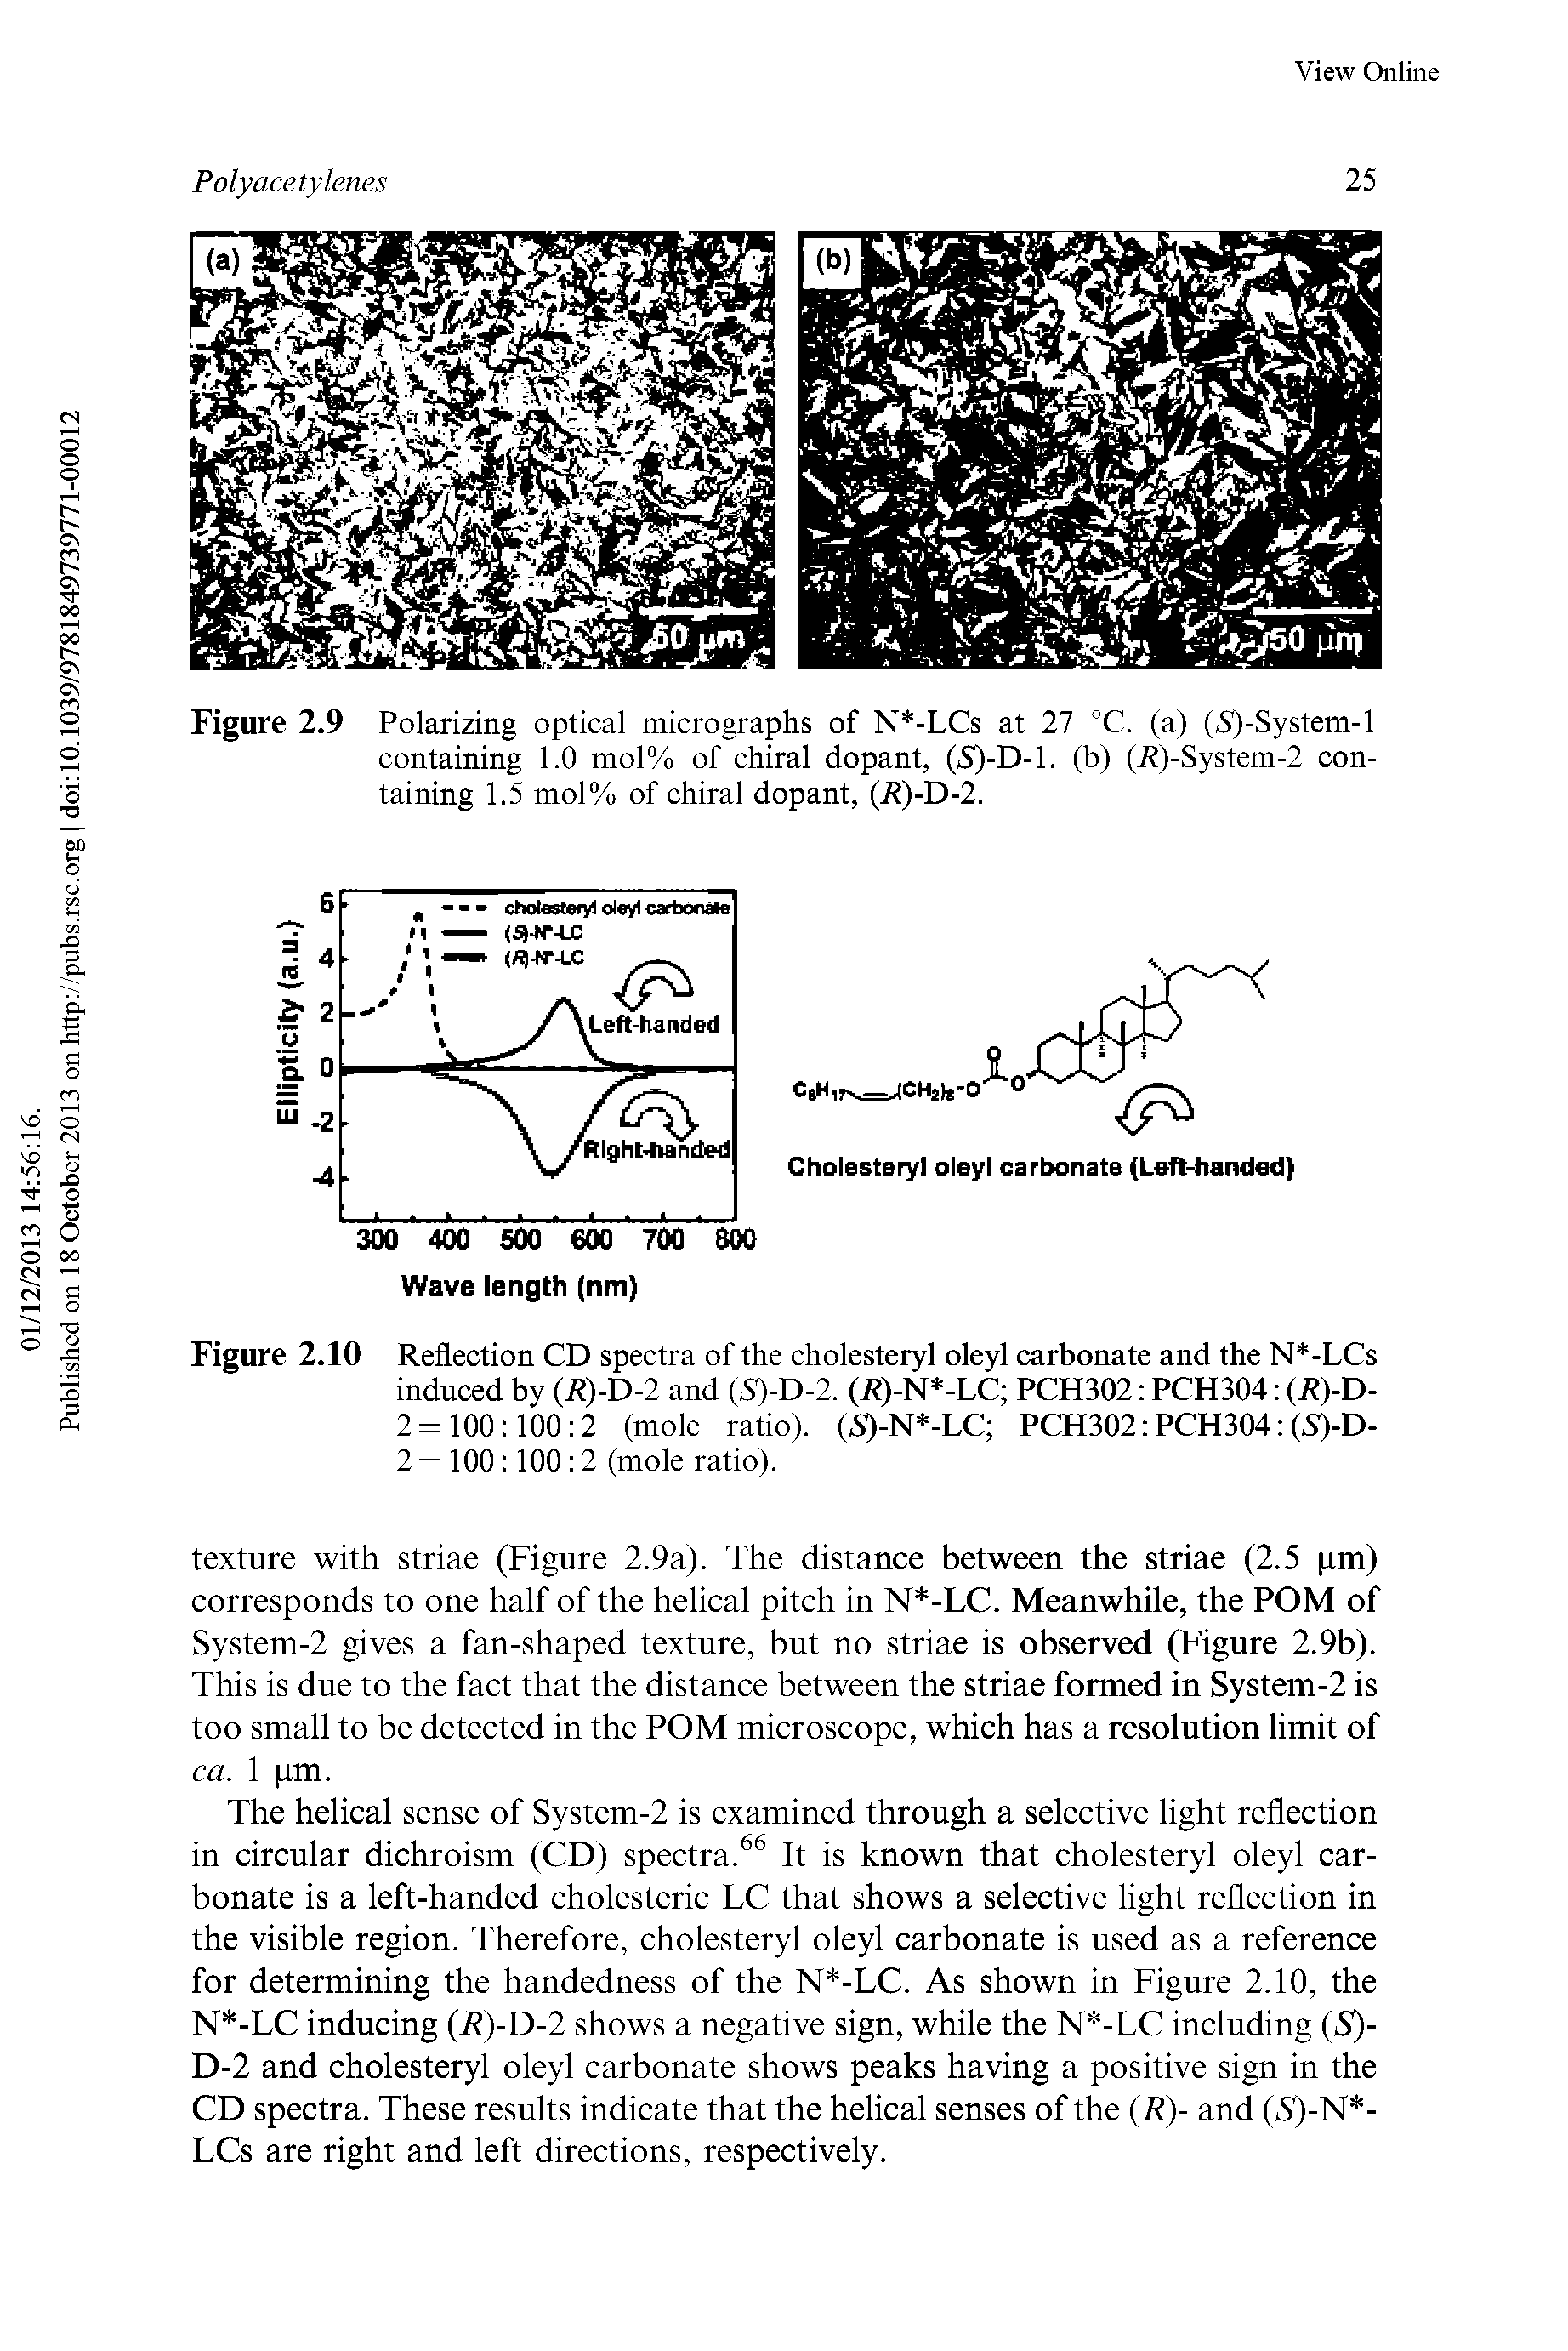 Figure 2.10 Reflection CD spectra of the cholesteryl oleyl carbonate and the N -LCs induced by (R)-D-2 and (5)-D-2. (R)-N -LC PCH302 PCH304 (R)-D-2=100 100 2 (mole ratio). (5)-N -LC PCH302 PCH304 (5)-D-...